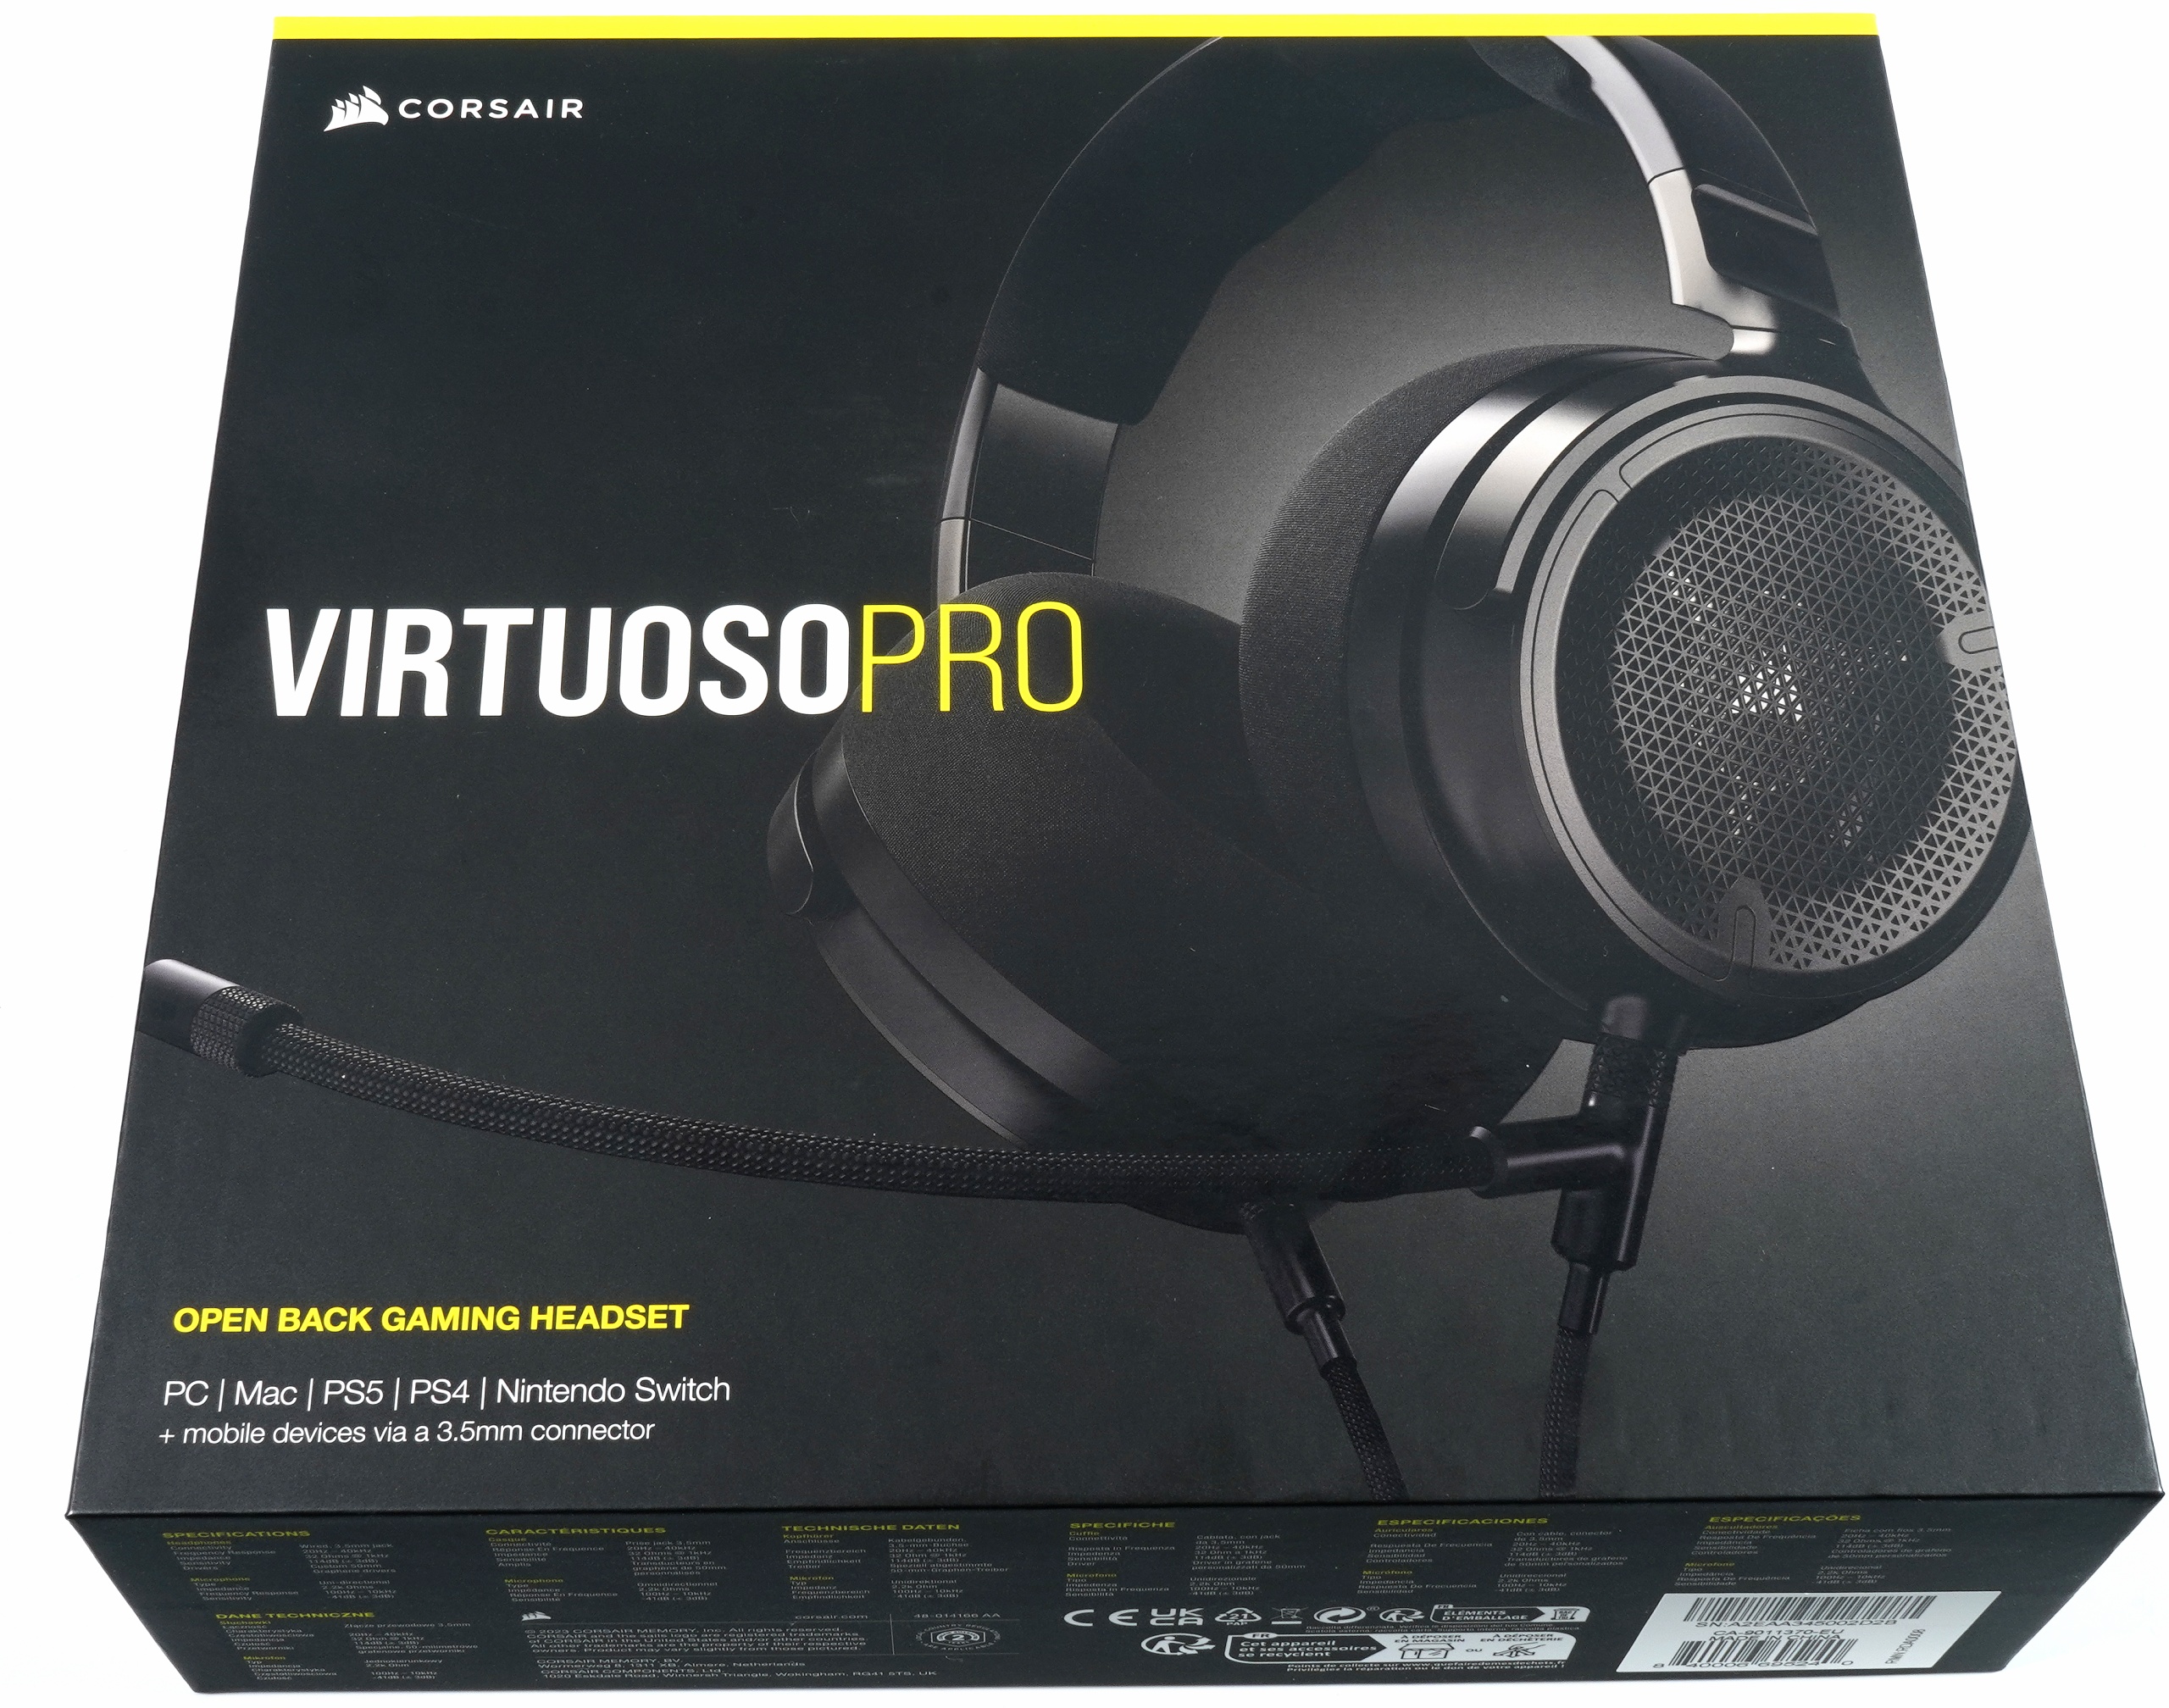 headset stereo - Virtuoso Corsair the | good with qualities review Pro Open igor´sLAB of headphones